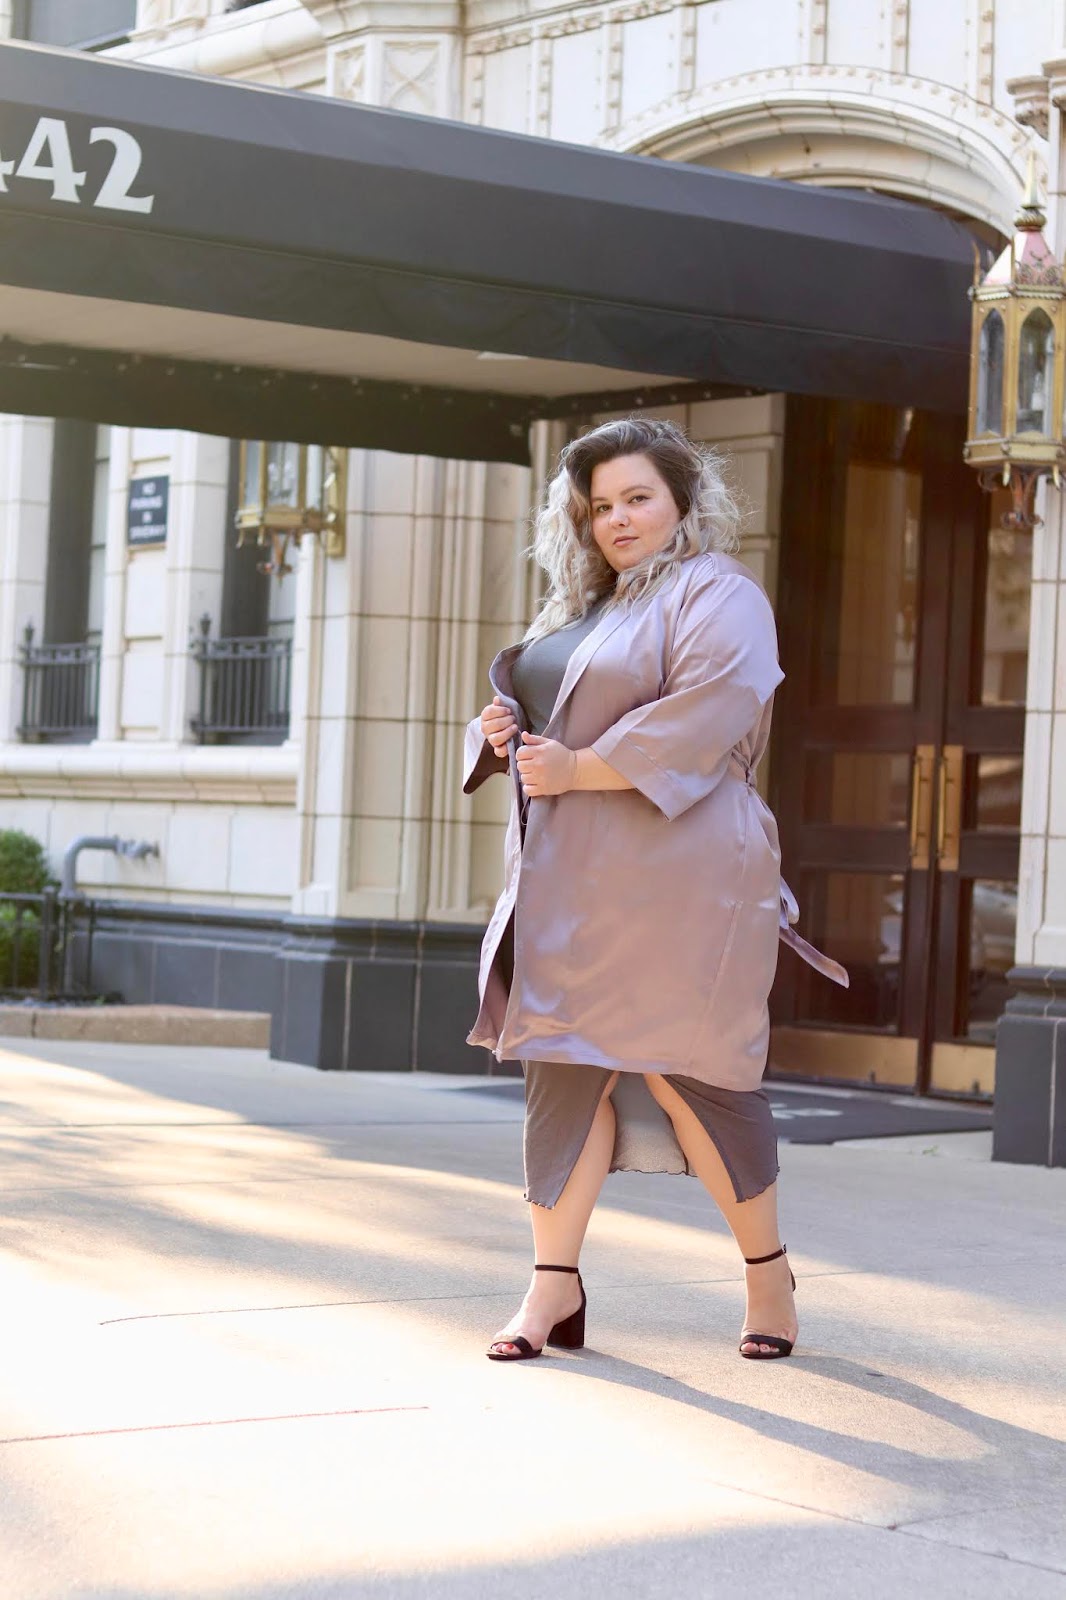 Chicago Plus Size Petite Fashion Blogger Natalie in the City reviews Soncy's satin robe kimono duster in lavender.